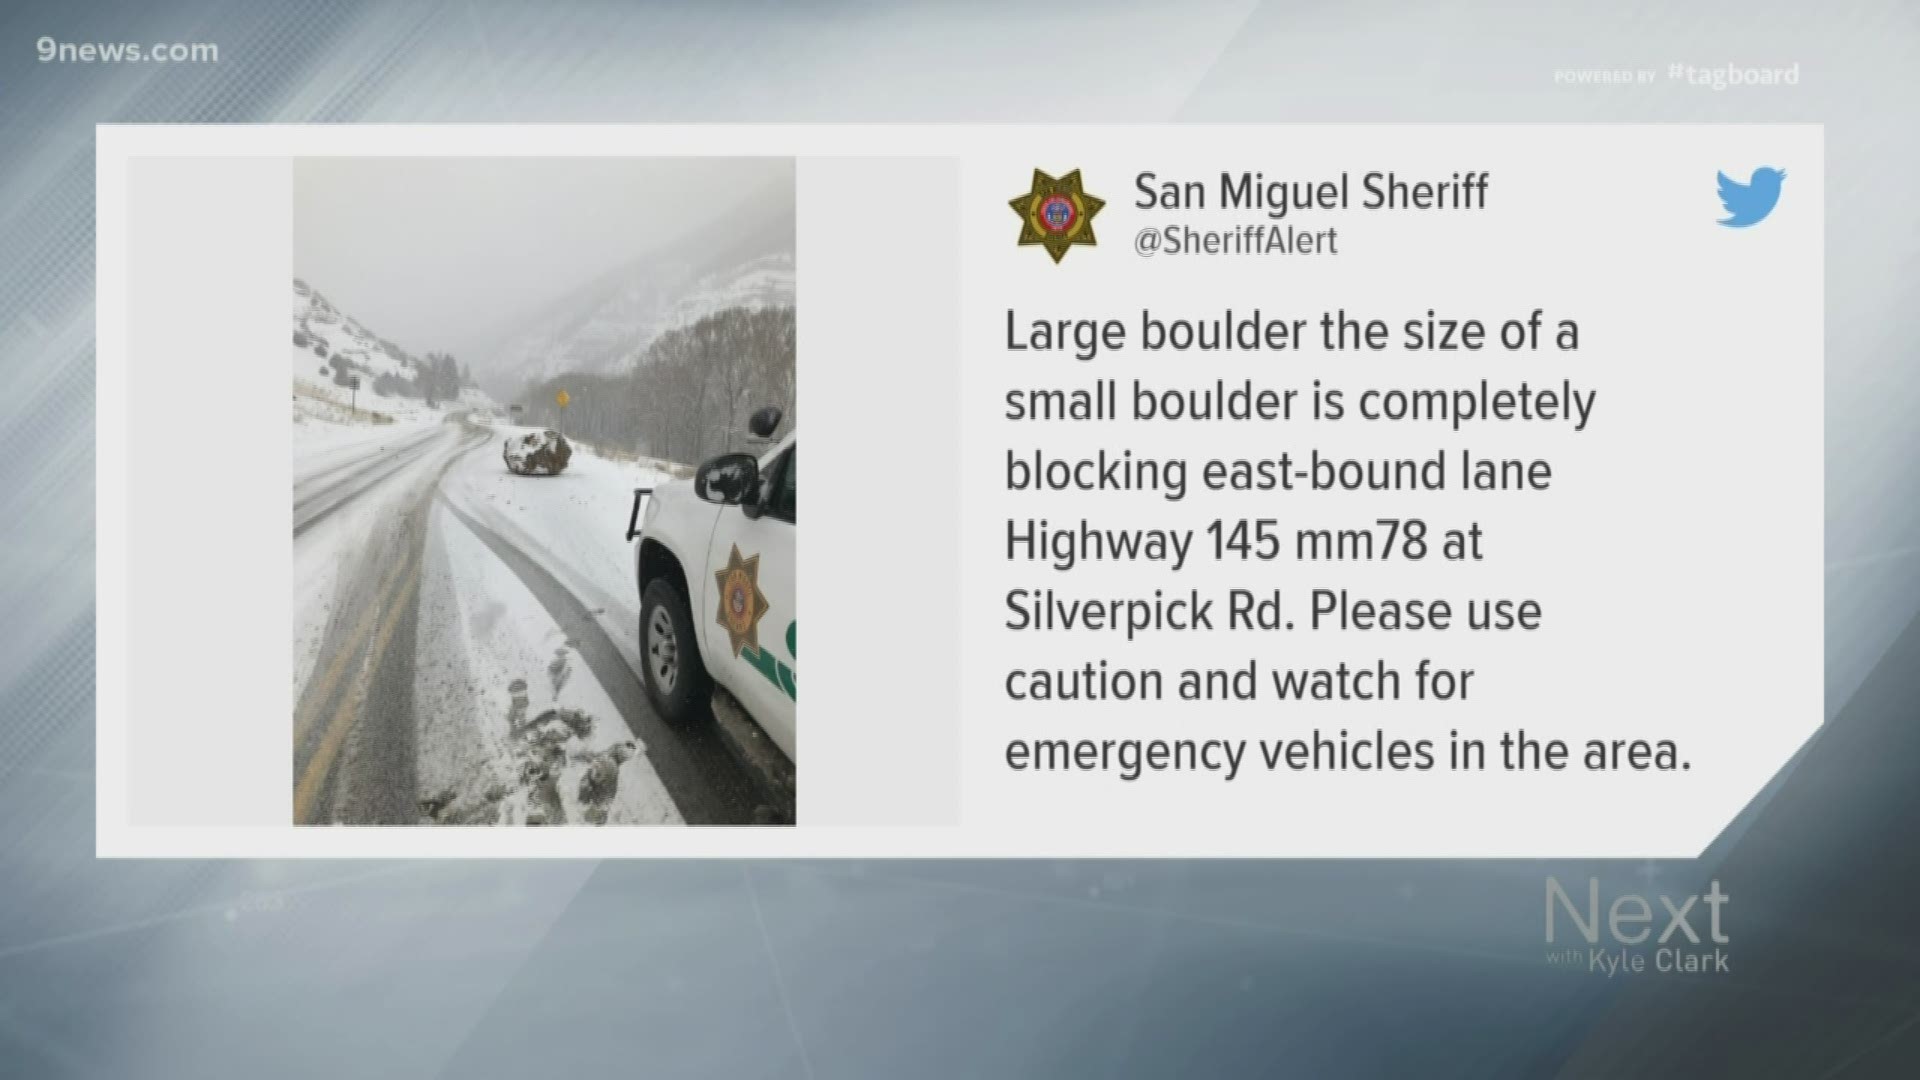 The sheriff's office in San Miguel County, Colorado, tweeted about a road closure, and it turned into internet gold.